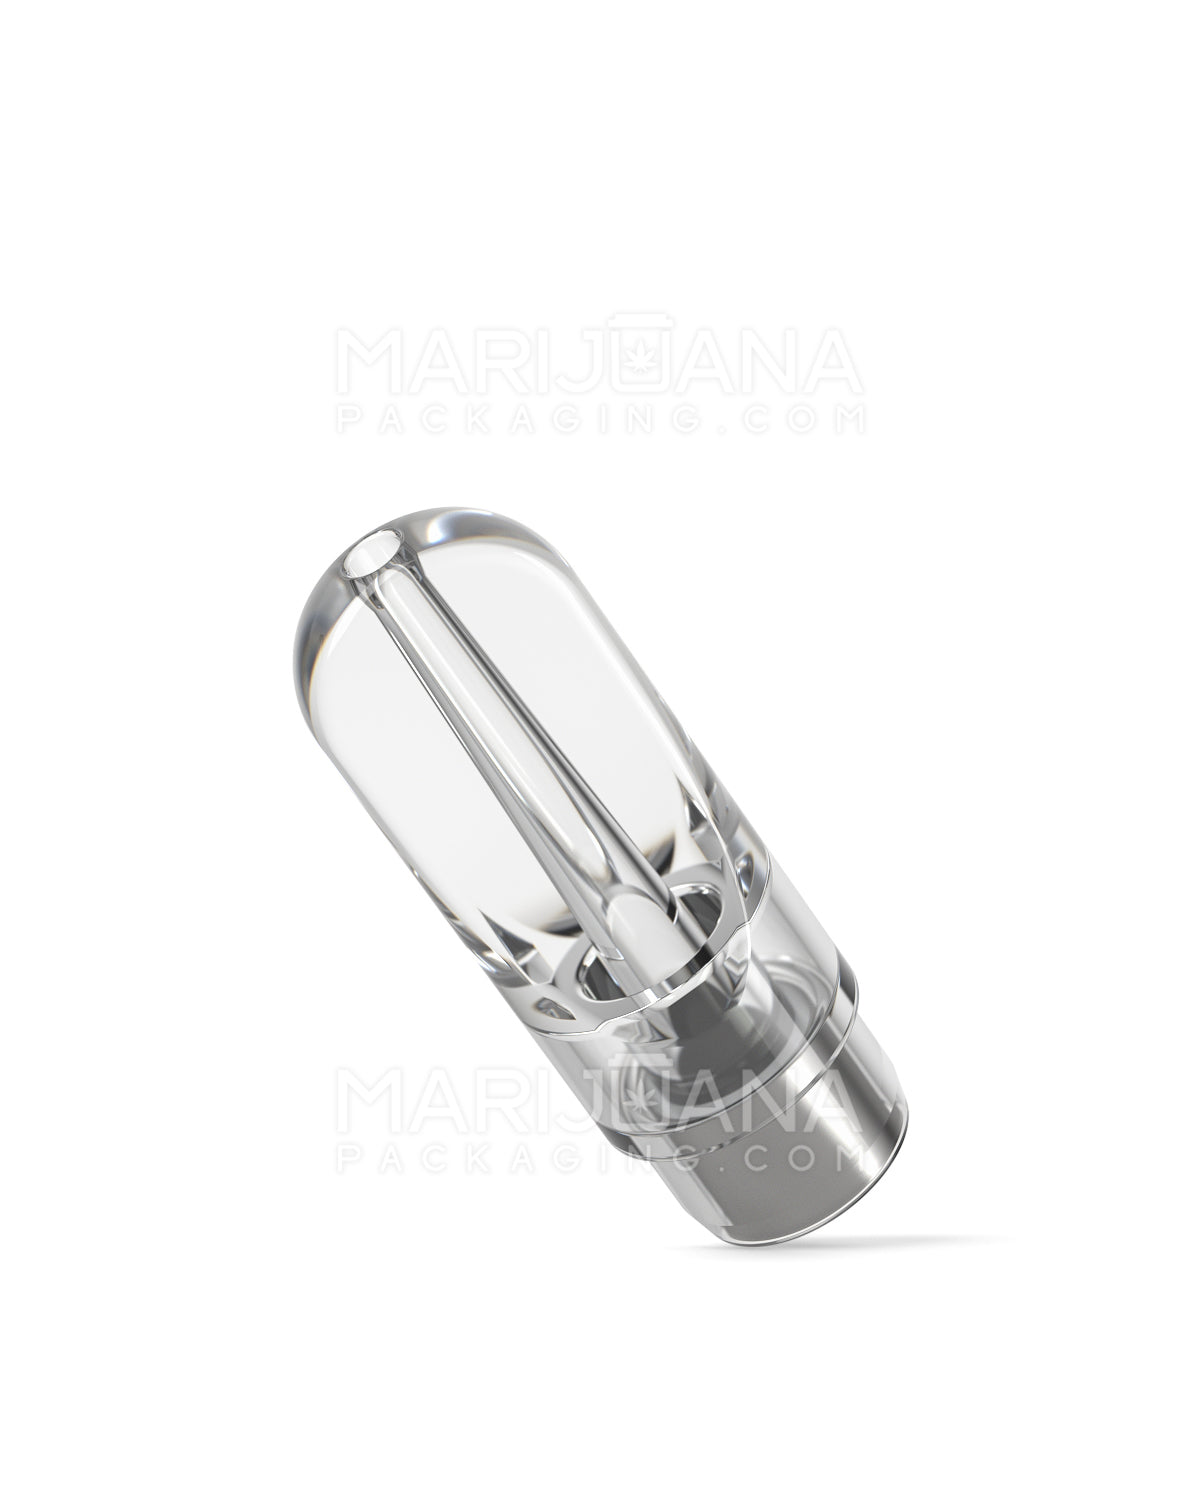 AVD | Flat Vape Mouthpiece for Plastic Cartridges | Clear Plastic - Press On - 600 Count - 4